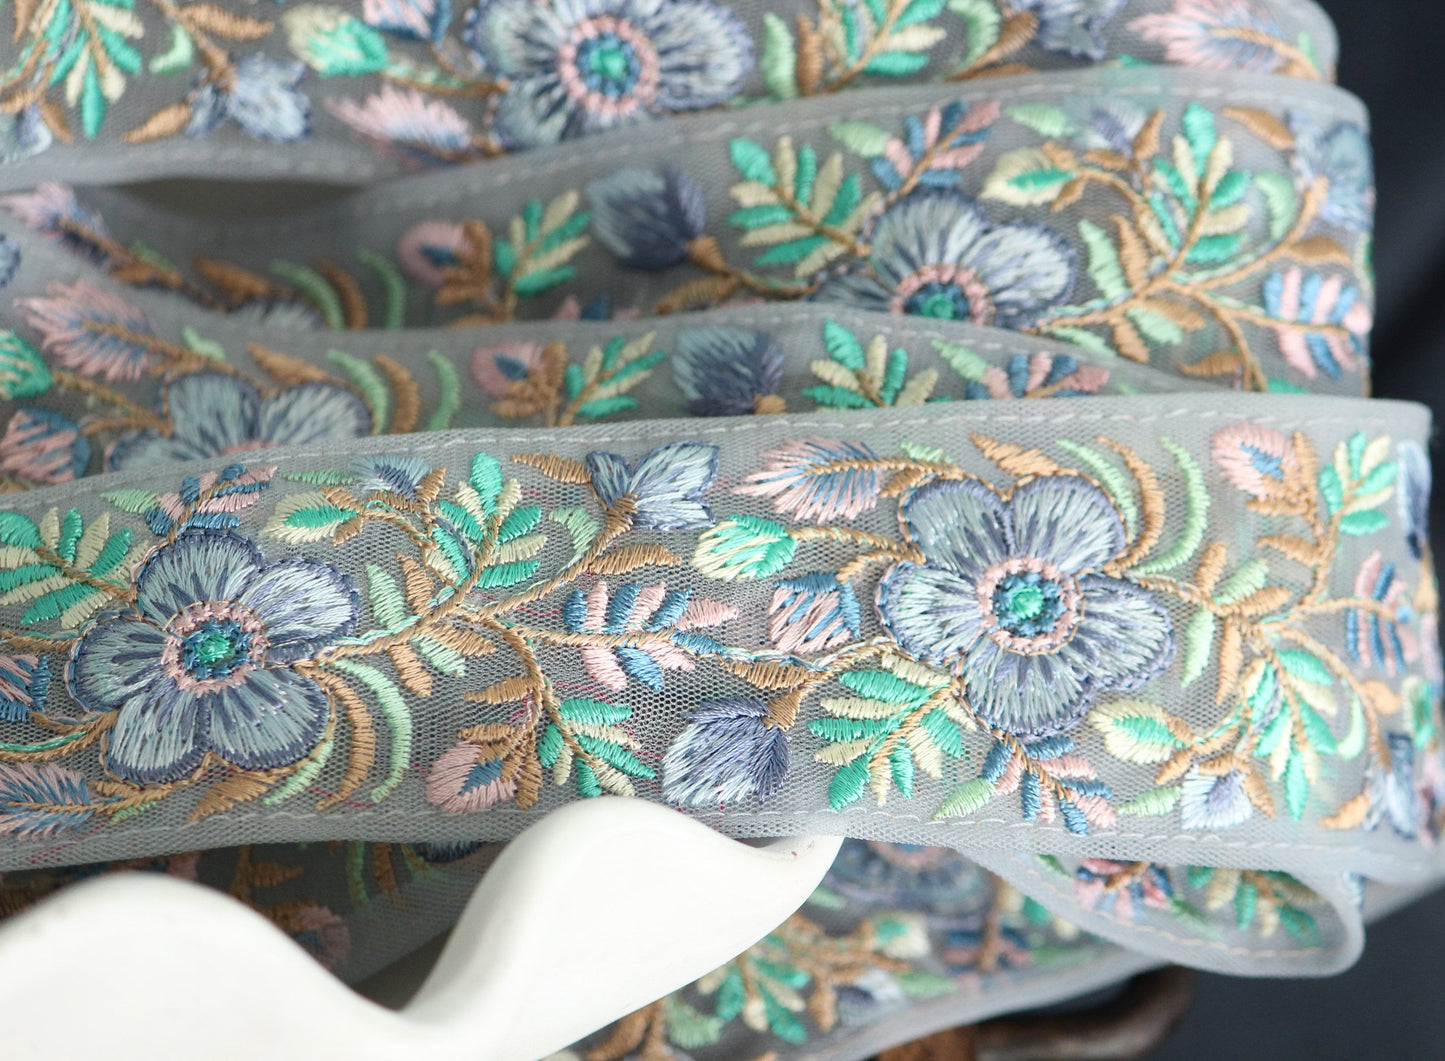 1yard-Pastel lavender floral thread embroidery ribbon on grey beige mesh fabric-Blue green pink thread embroidery/bow making ribbon trim